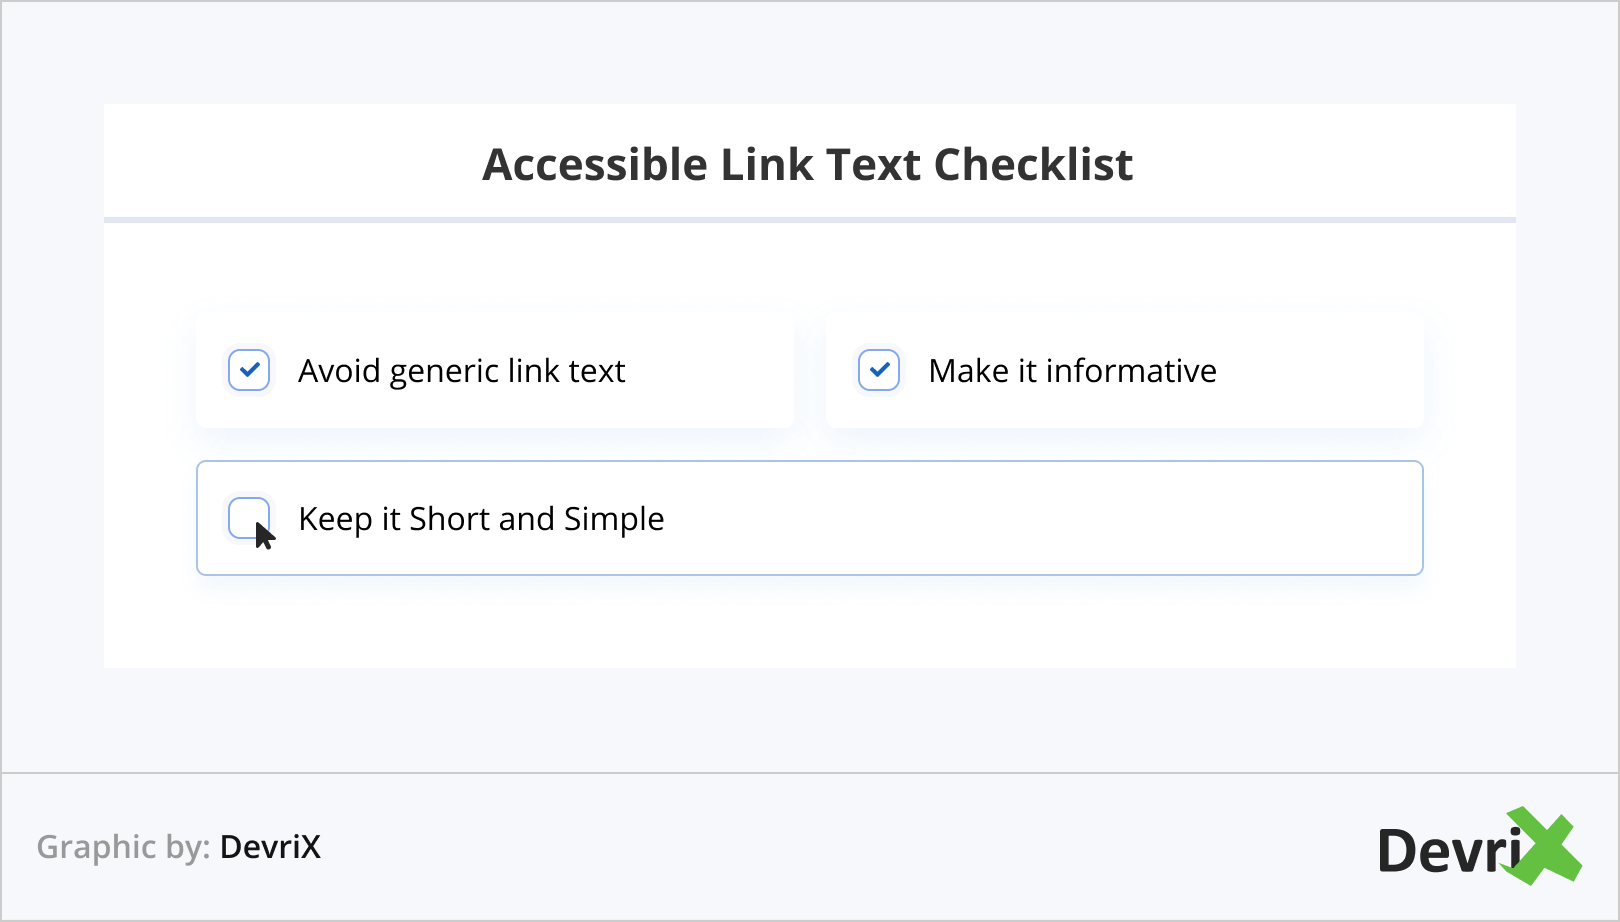 Accessible Link Text Checklist